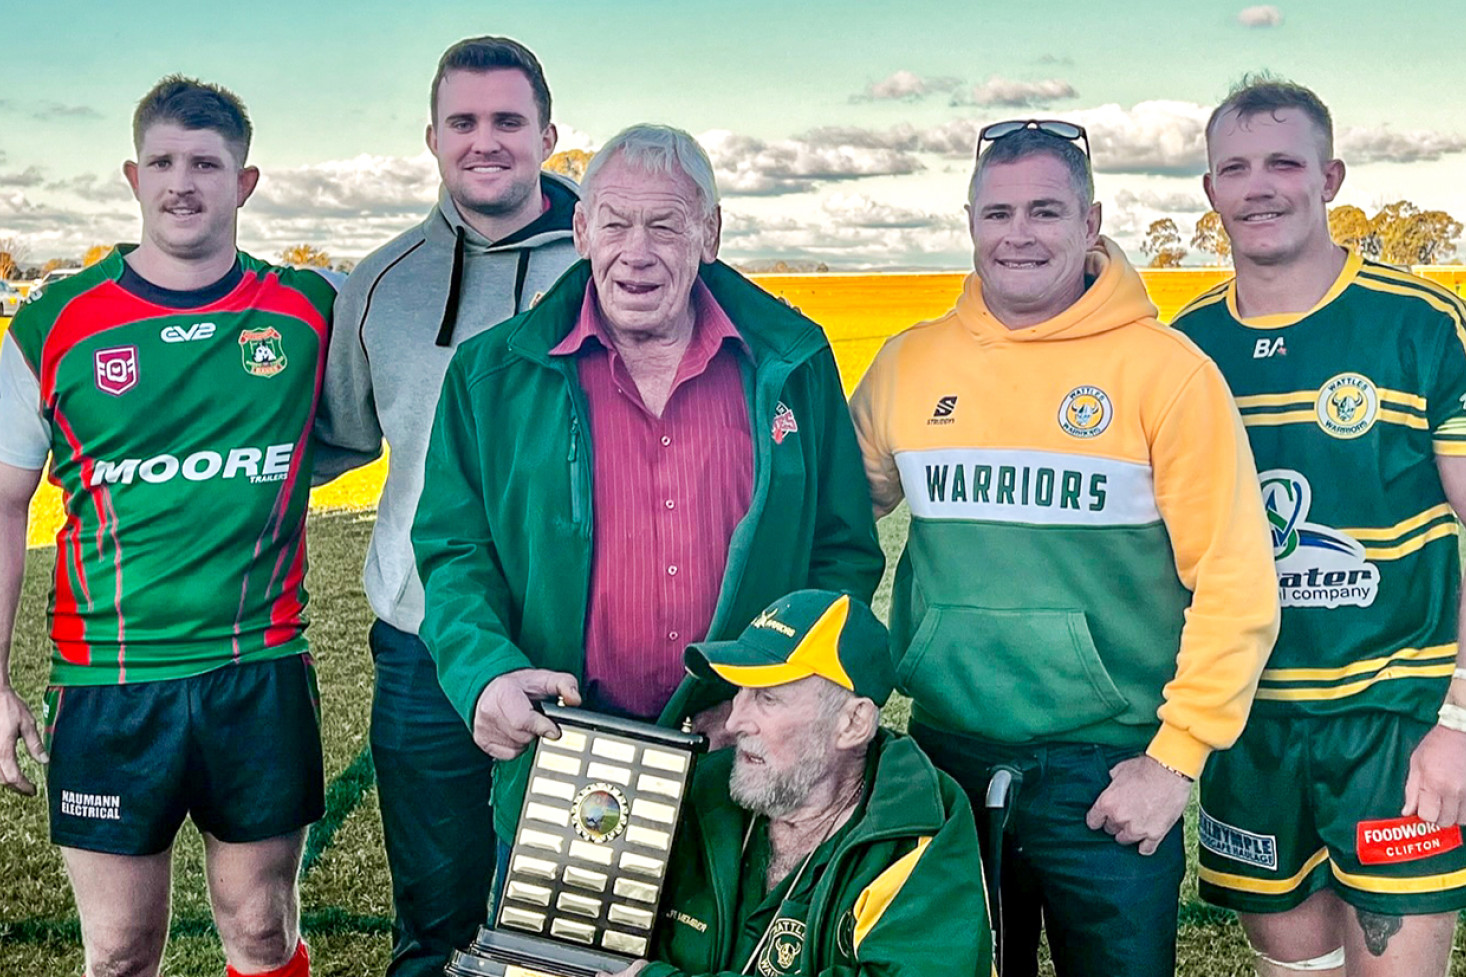 Both the Pittsworth Danes and the Wattles Warriors shared the 2014 Jack Duggan – Gary Sutton Shield after a 12 all result at Clifton on Saturday, from left, Tom O’Sullivan (Pittsworth Co-Captain), James Quinn (Pittsworth Coach), Gary Sutton, Jack Duggan, Travis Burns (Wattles Coach), Nick Van der Poel (Wattles Captain).